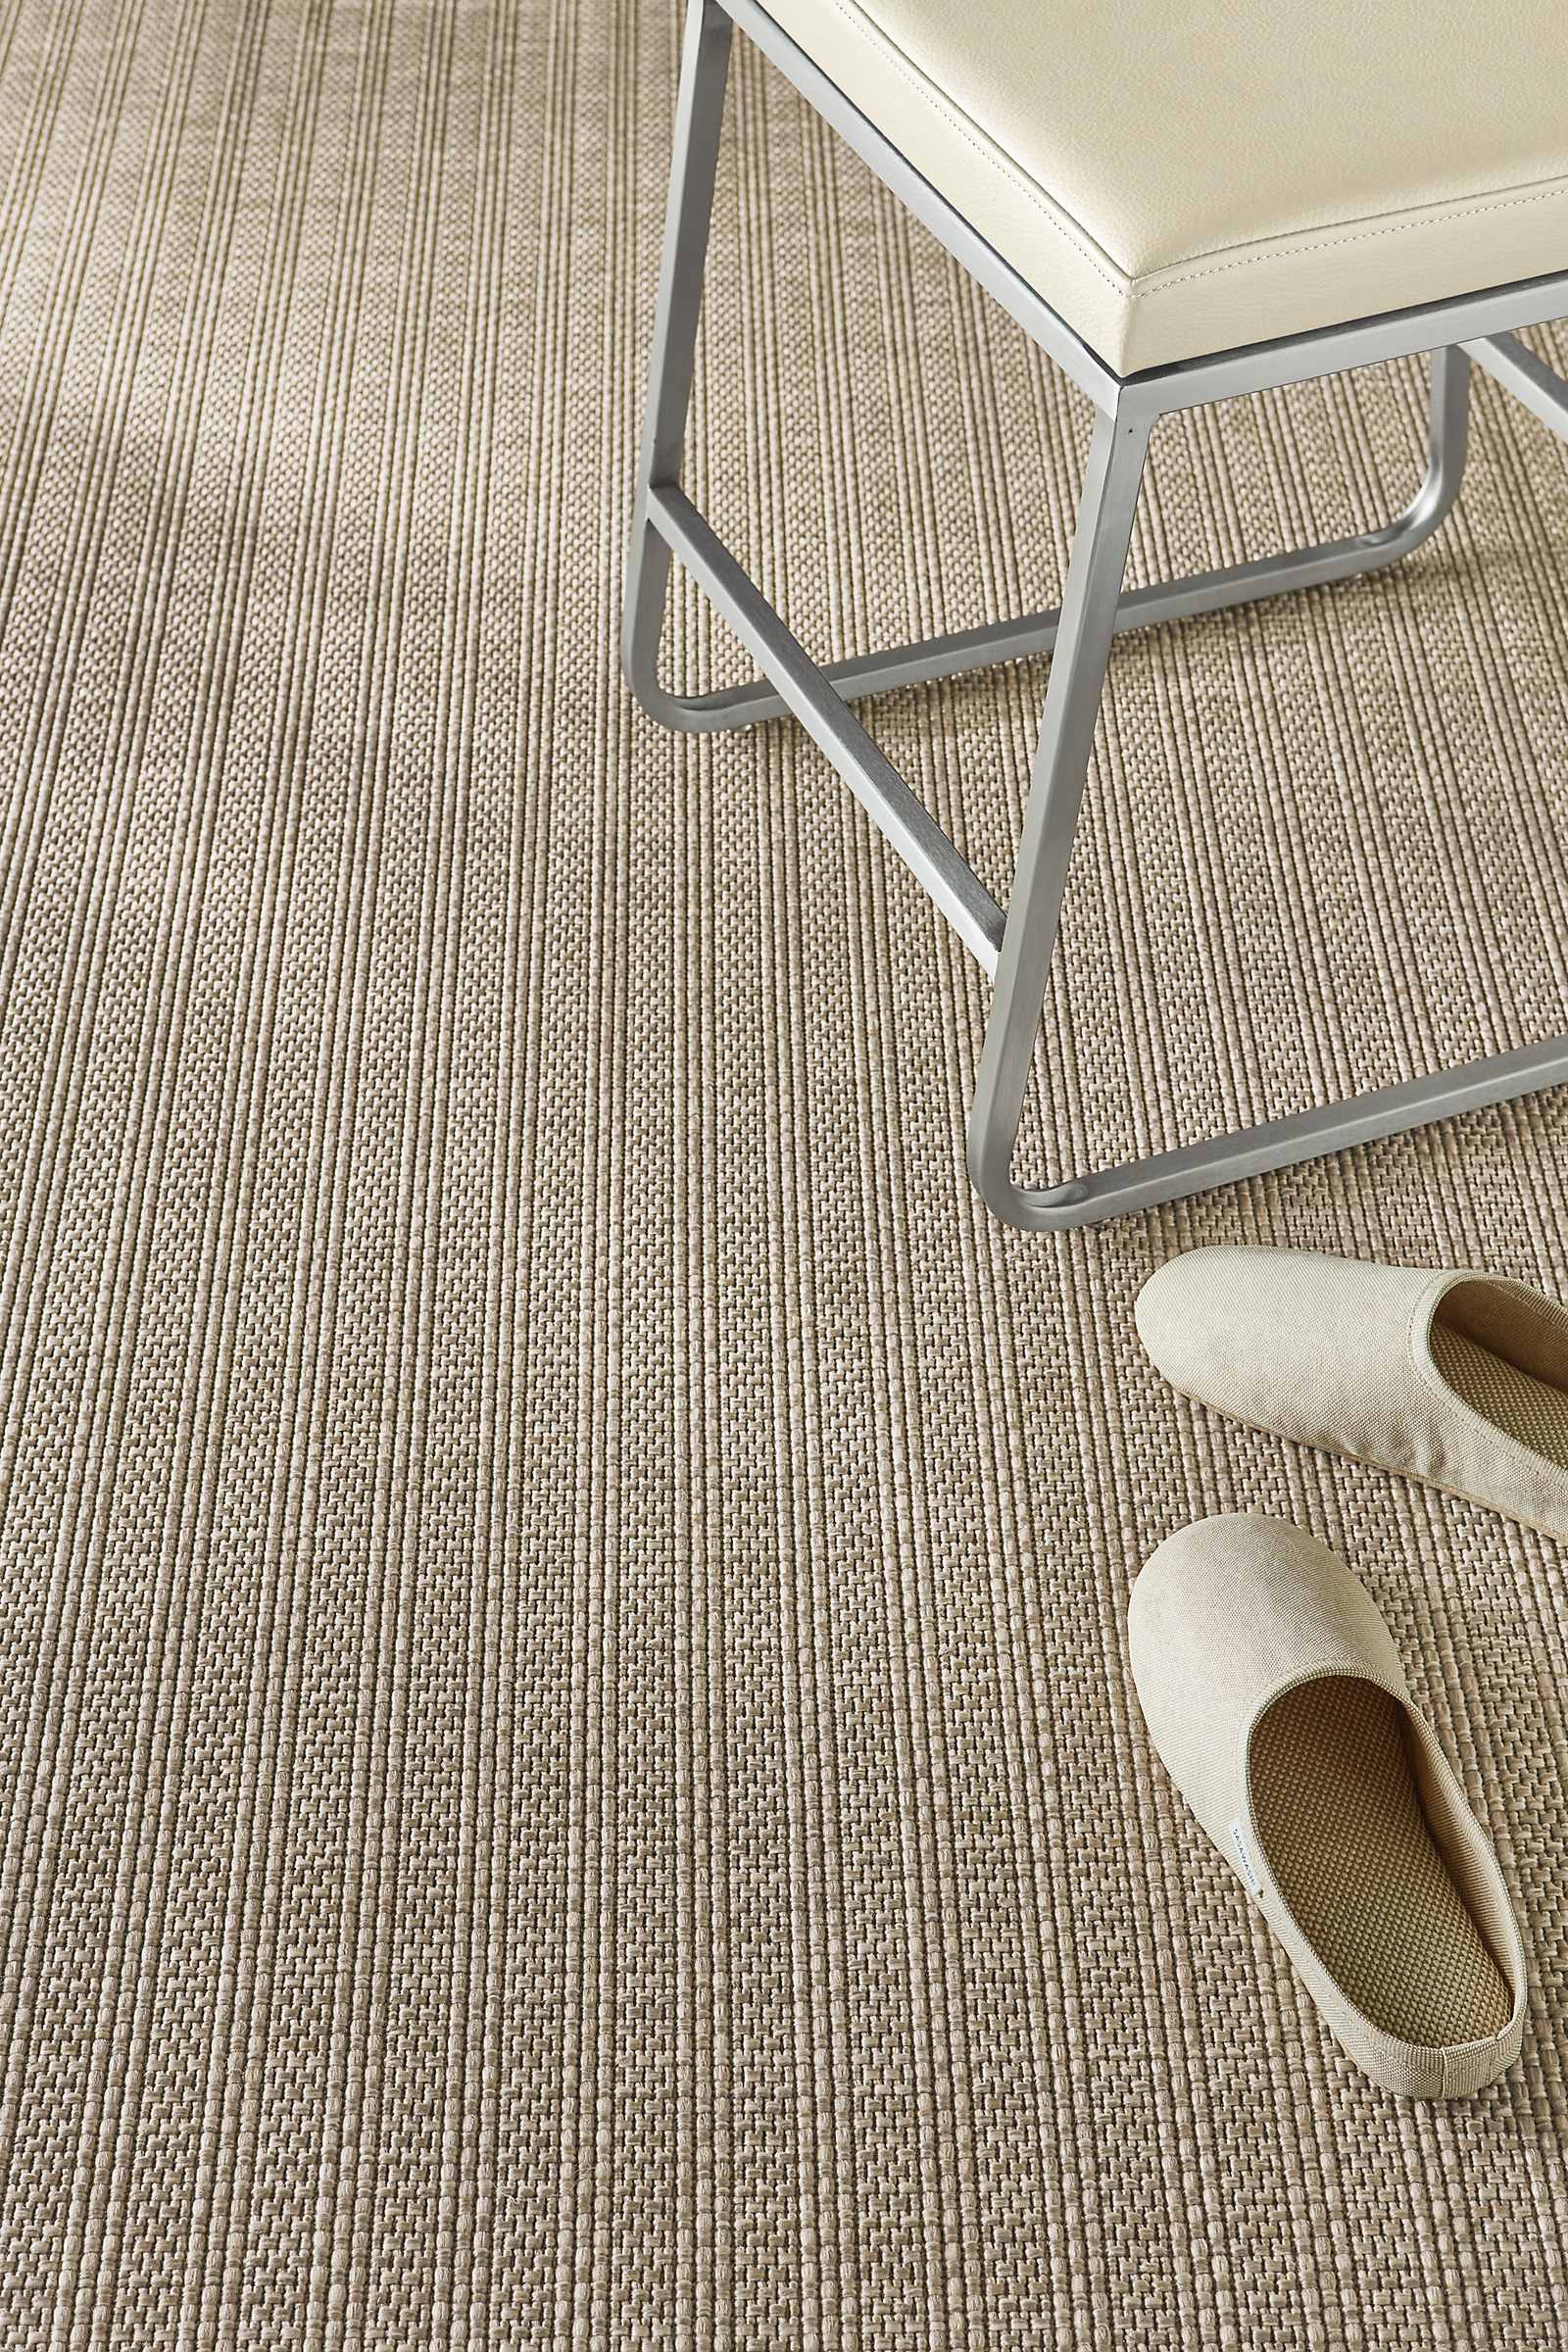 Detail shot showing partial Leland 8 by 10 rug in Cement and Collins low stool in Pesaro black leather.